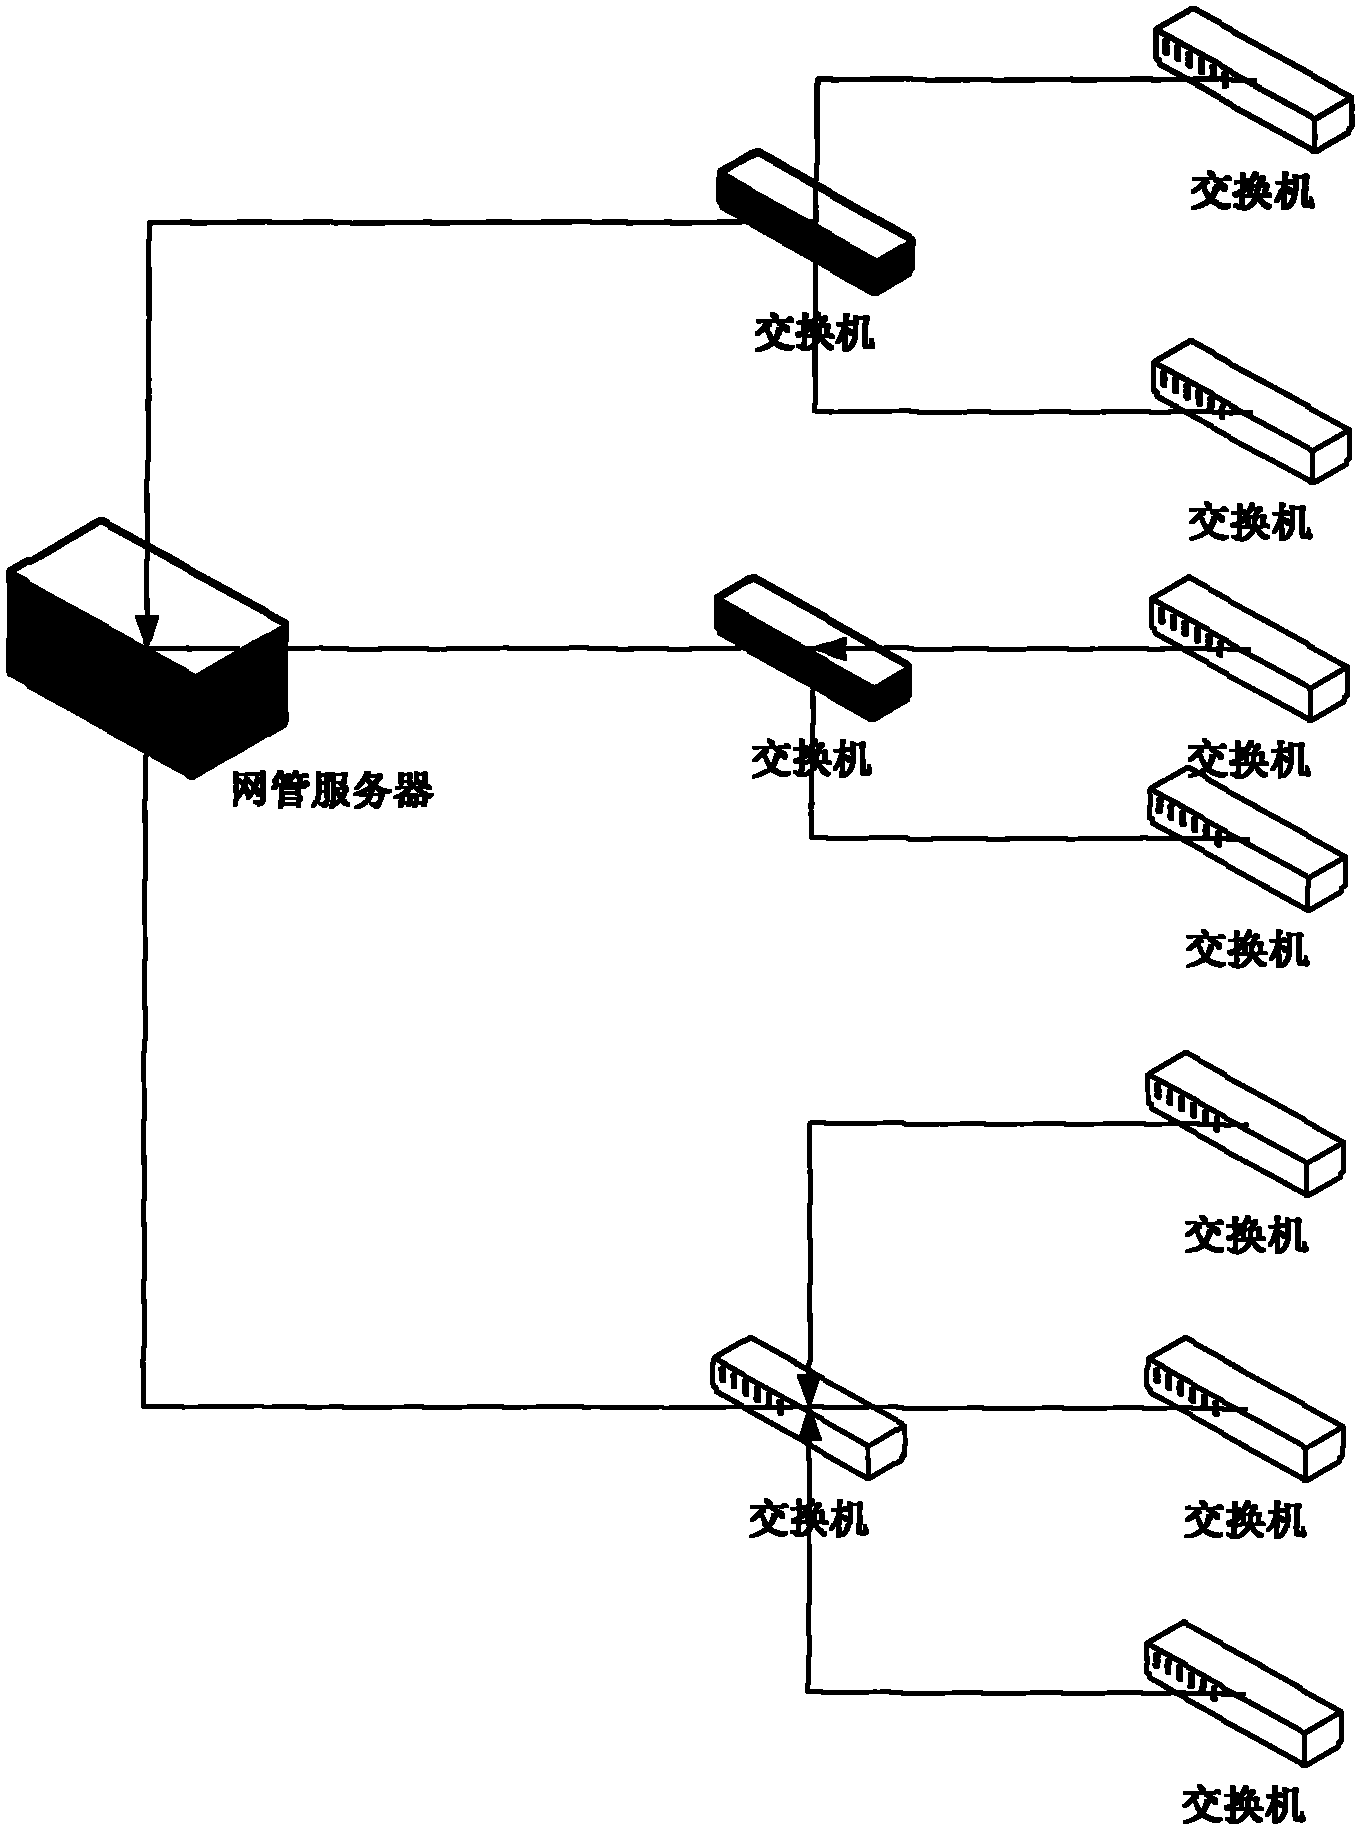 Access network switch port utilization rate counting method